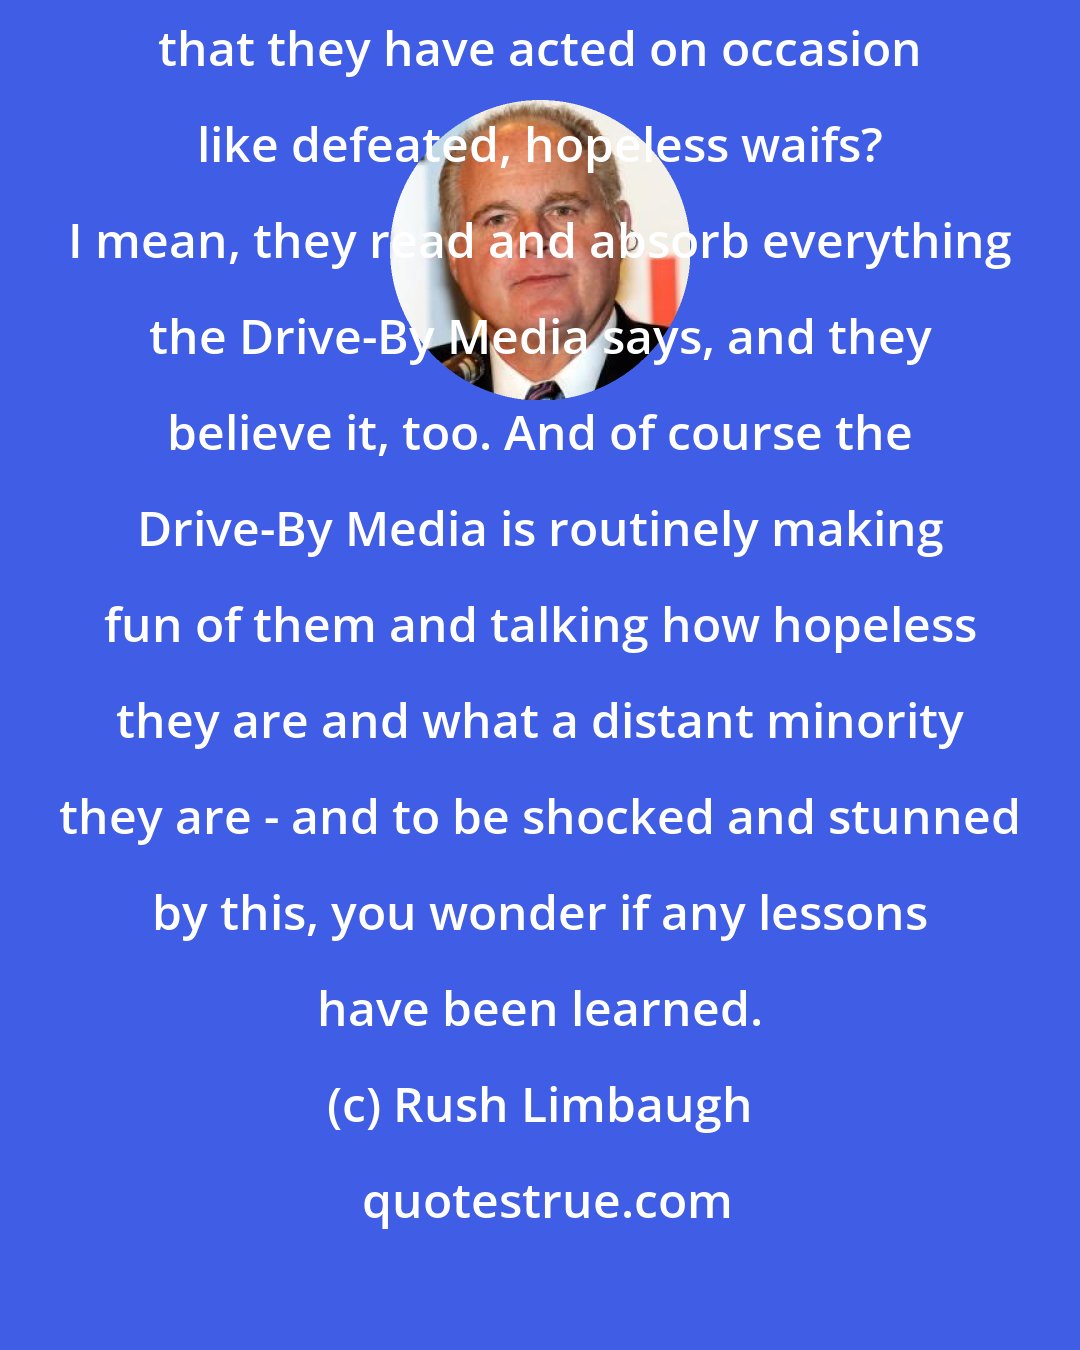 Rush Limbaugh: There are too many Republicans that believe it, too. And is it any wonder that they have acted on occasion like defeated, hopeless waifs? I mean, they read and absorb everything the Drive-By Media says, and they believe it, too. And of course the Drive-By Media is routinely making fun of them and talking how hopeless they are and what a distant minority they are - and to be shocked and stunned by this, you wonder if any lessons have been learned.